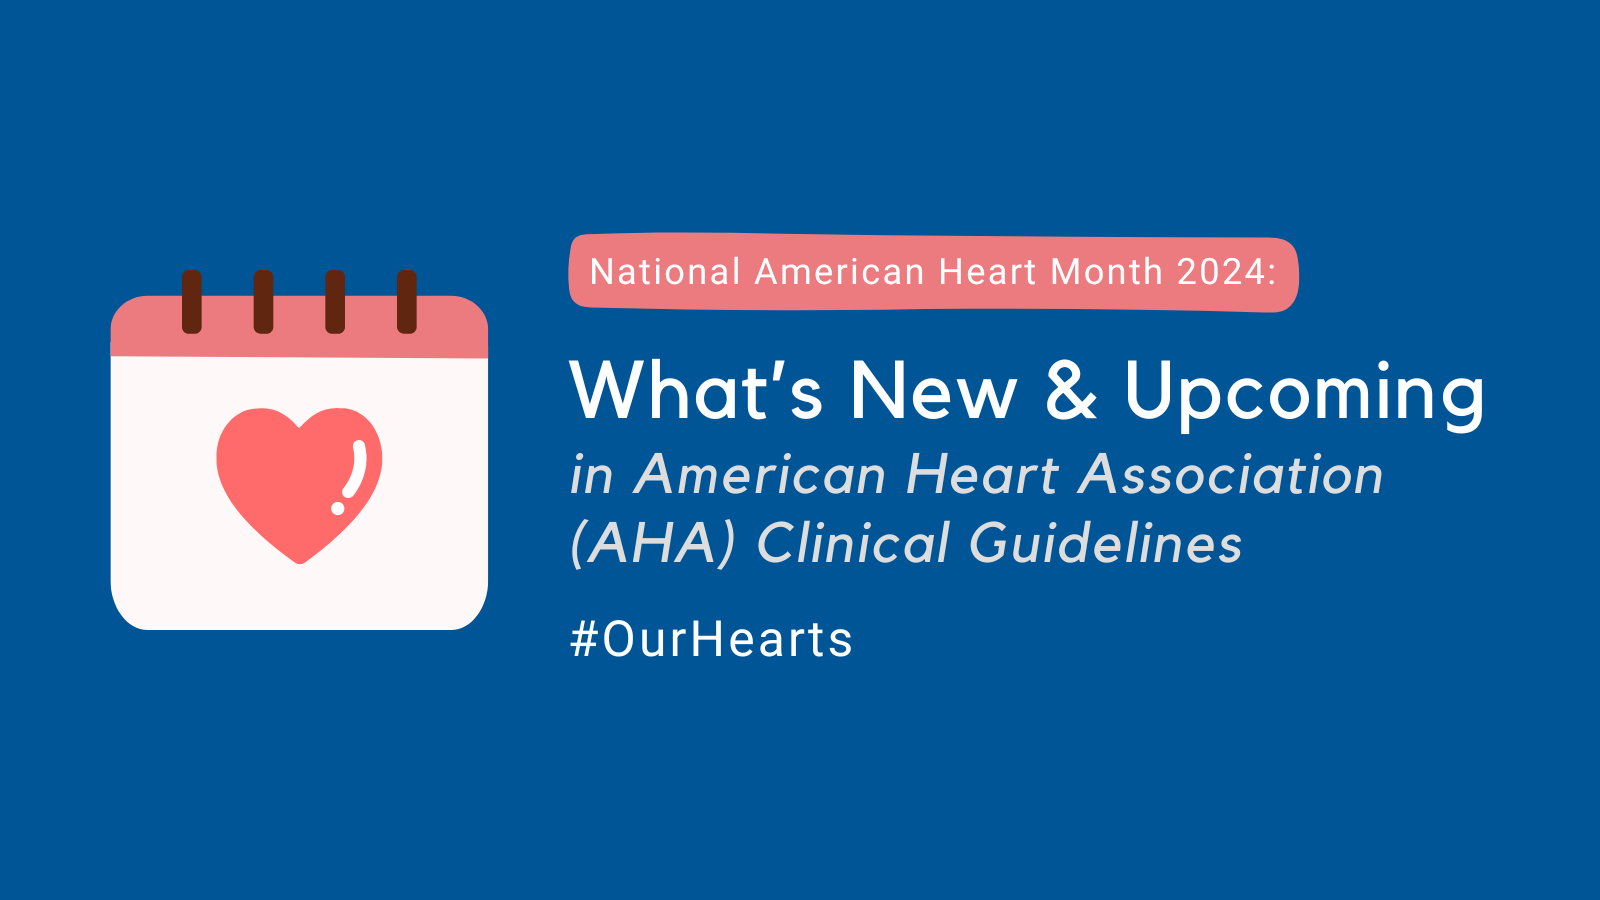 American Heart Month 2024: What’s New and Upcoming in American Heart Association Guidelines Hero Image